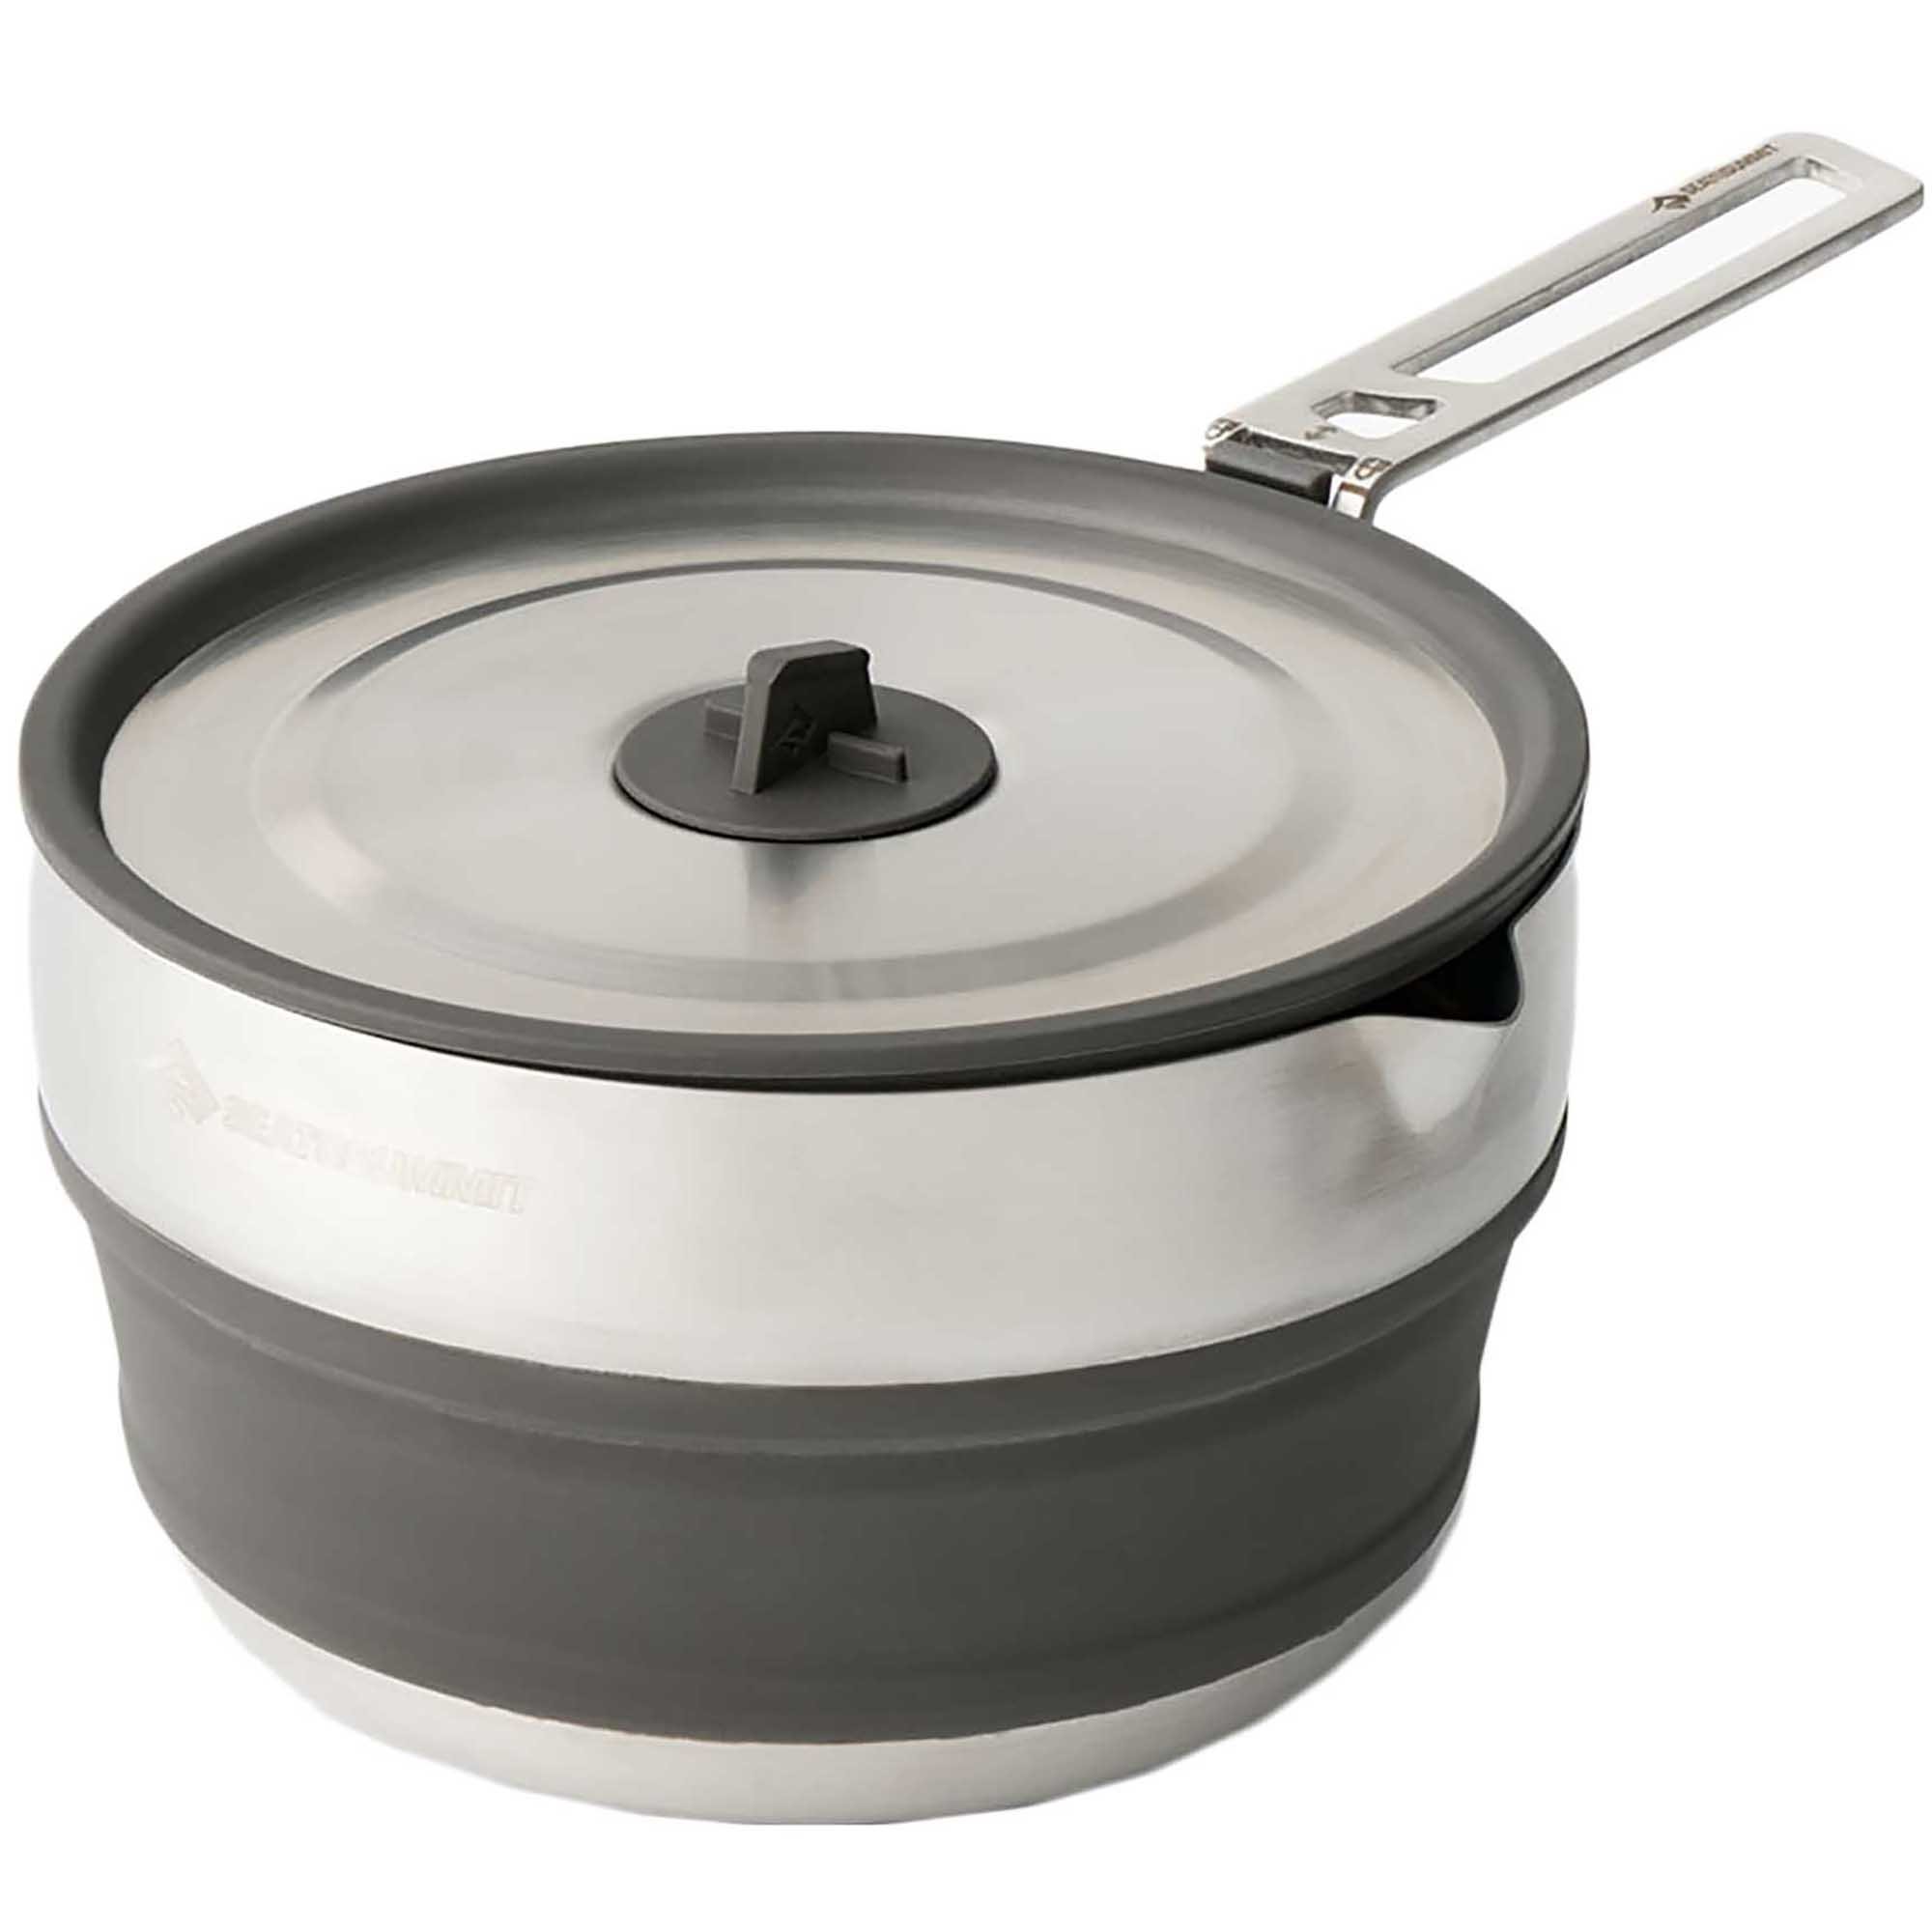 Photos - Other Camping Utensils Sea To Summit Detour 1.8L Collapsible Pouring Pot, Grey ACK026021-390101 